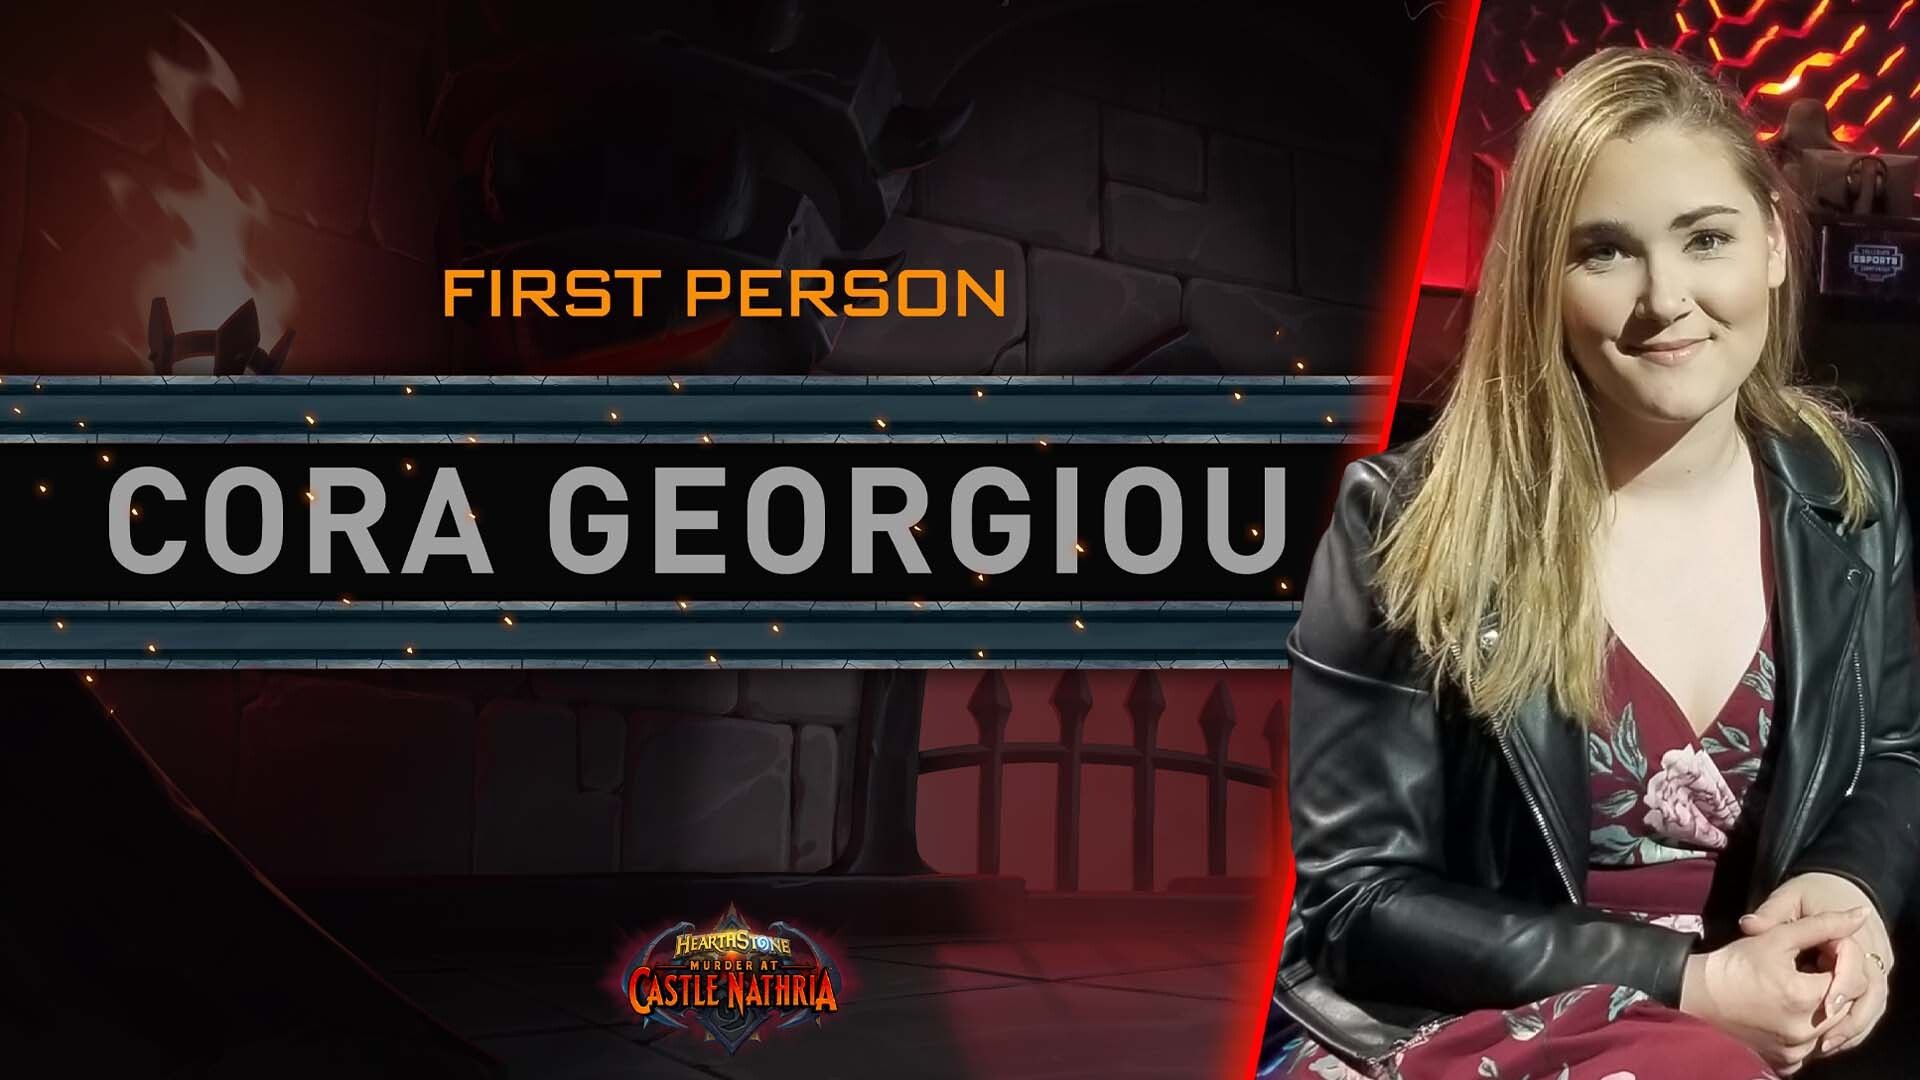 A photo of Cora Georgiou, a well-known Hearthstone personality and game designer at Blizzard.